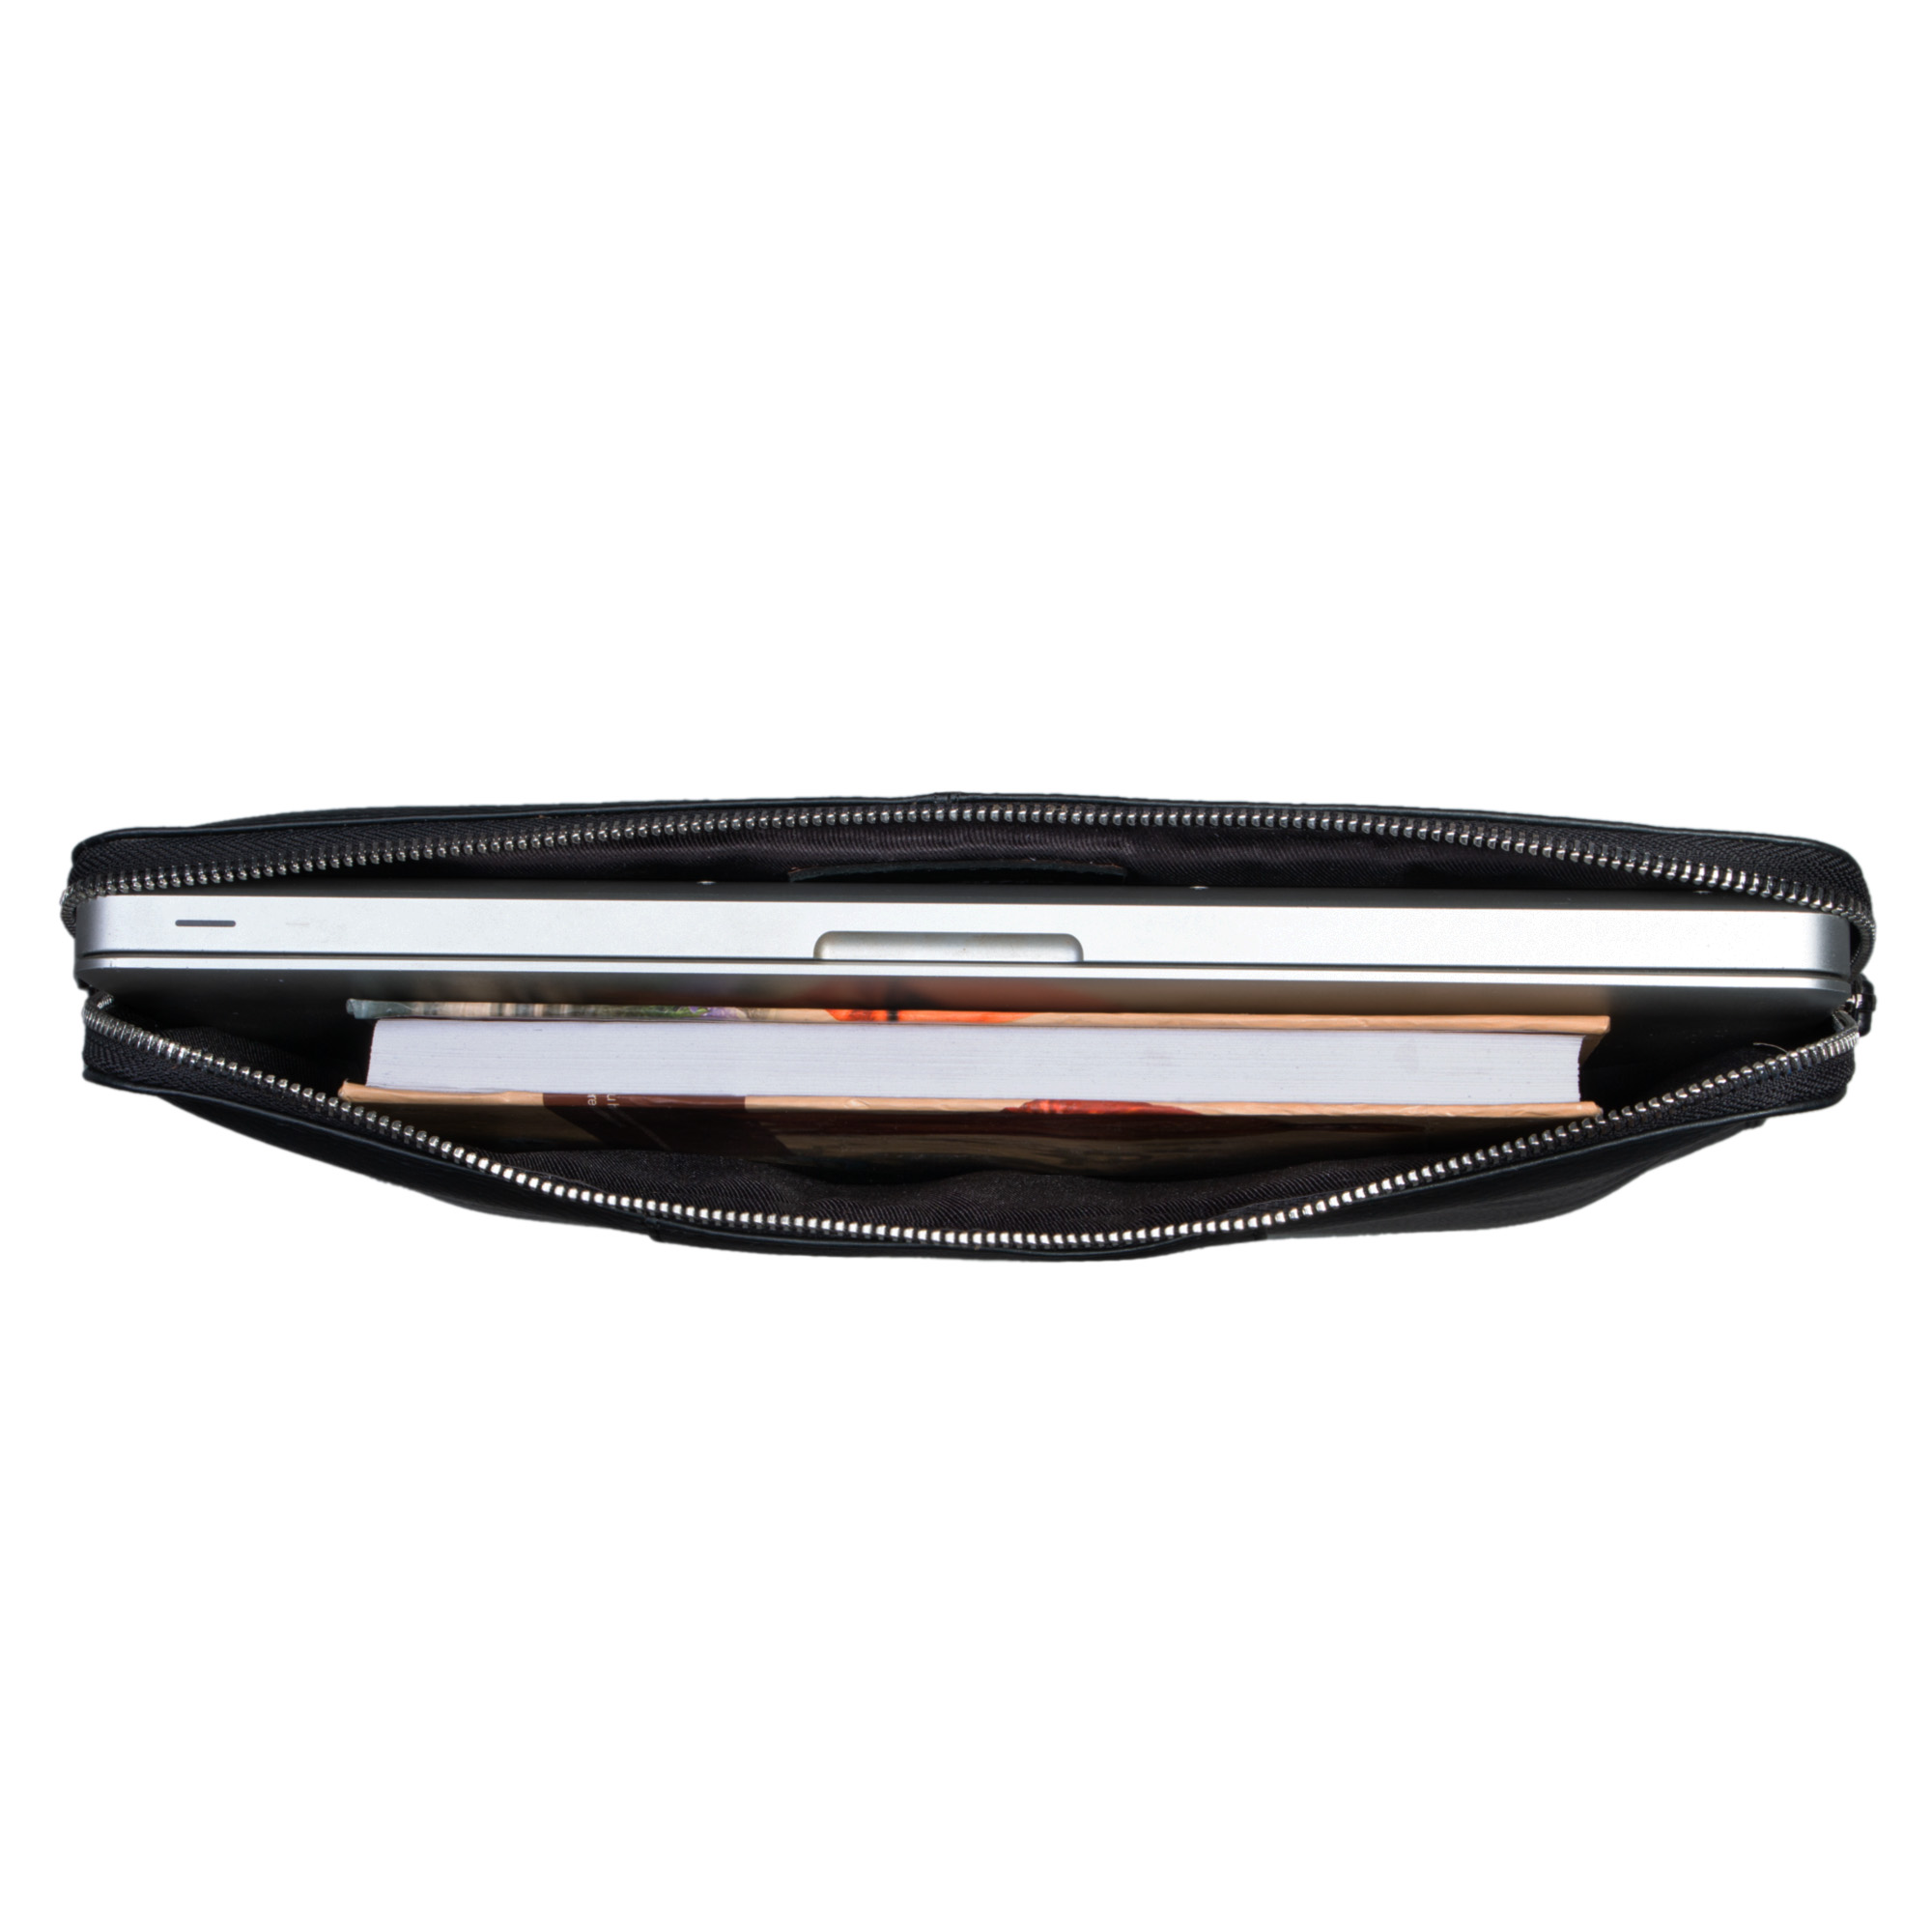 The Wilson Black Leather Clutch Bag